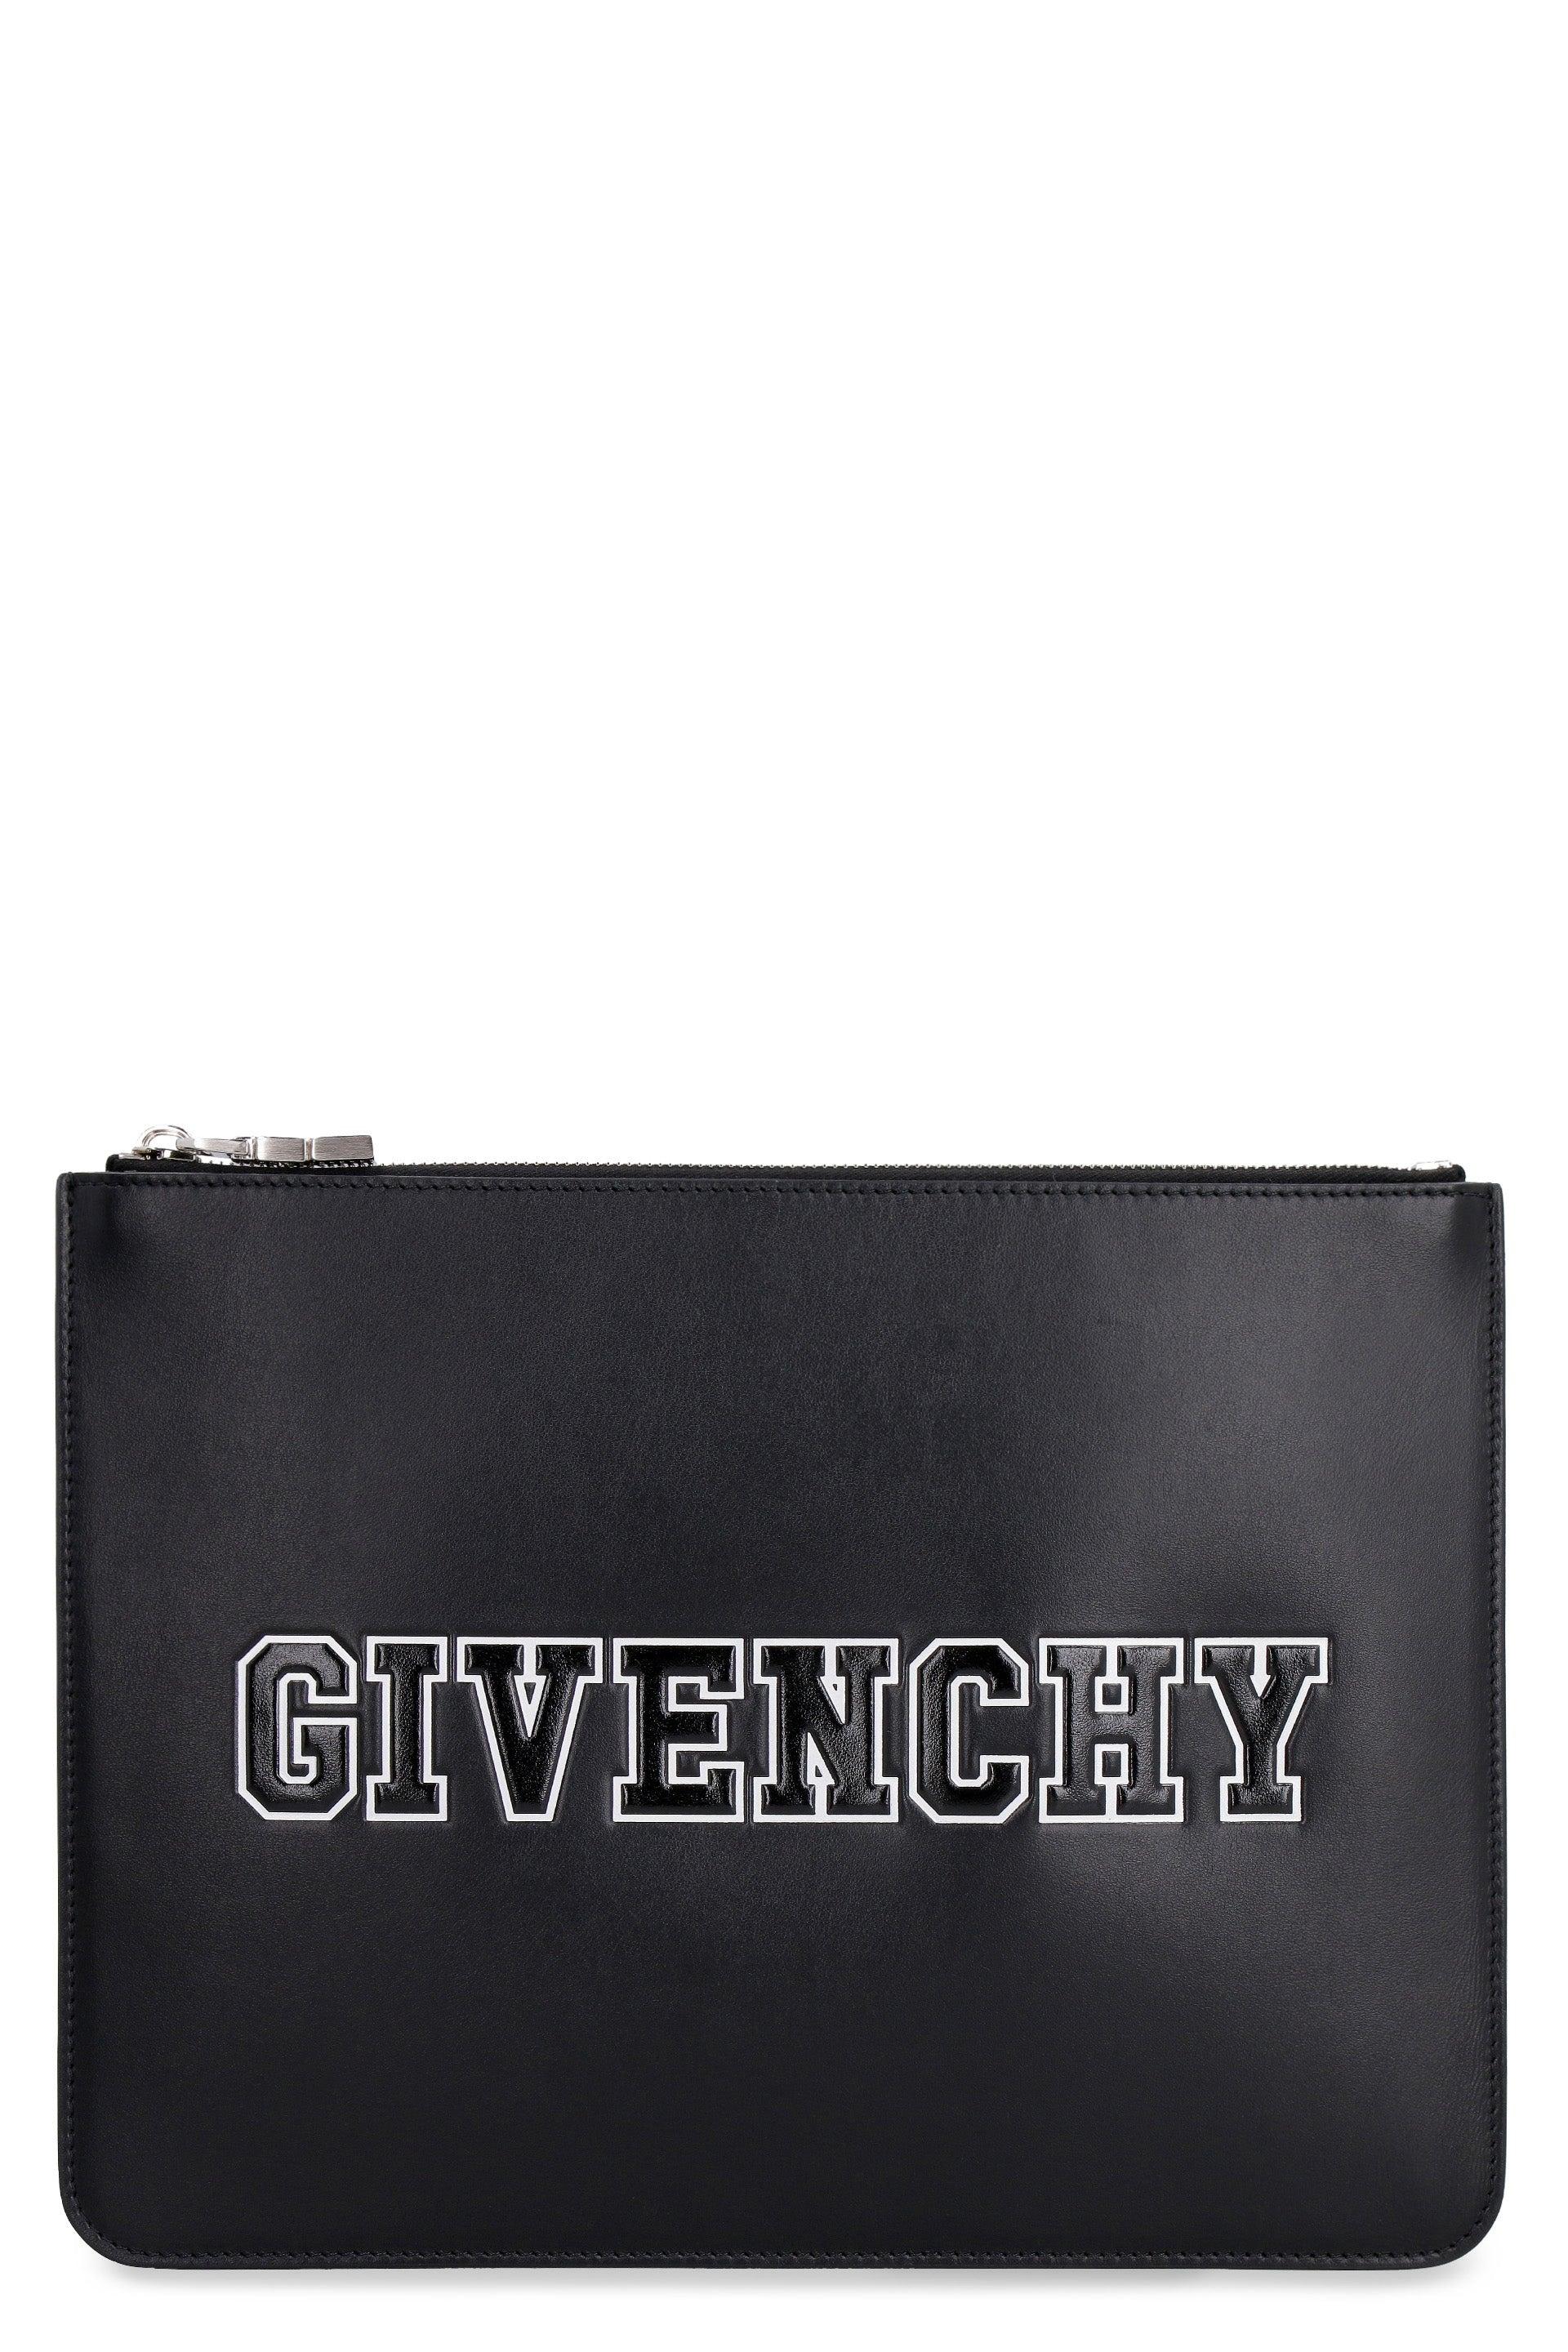 Givenchy Leather Flat Pouch in Black for Men | Lyst